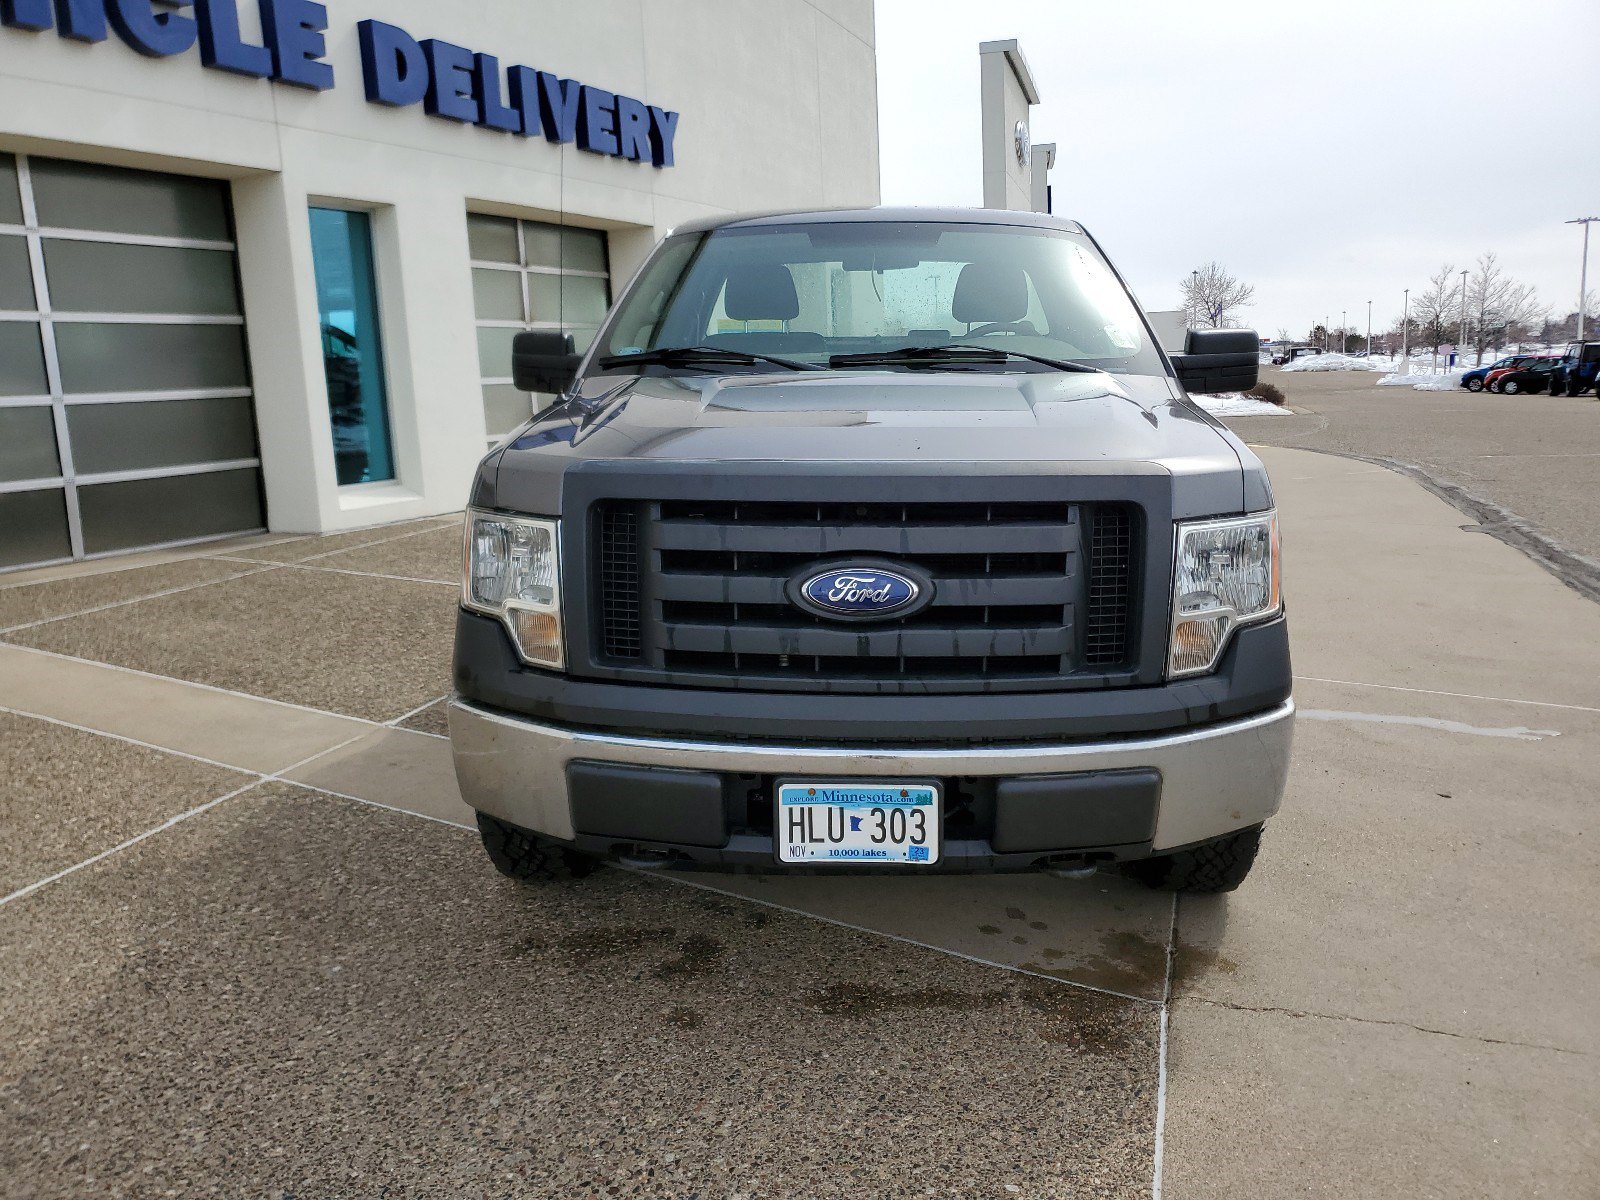 Used 2009 Ford F-150 XLT with VIN 1FTRF14W89KA75248 for sale in Baxter, Minnesota